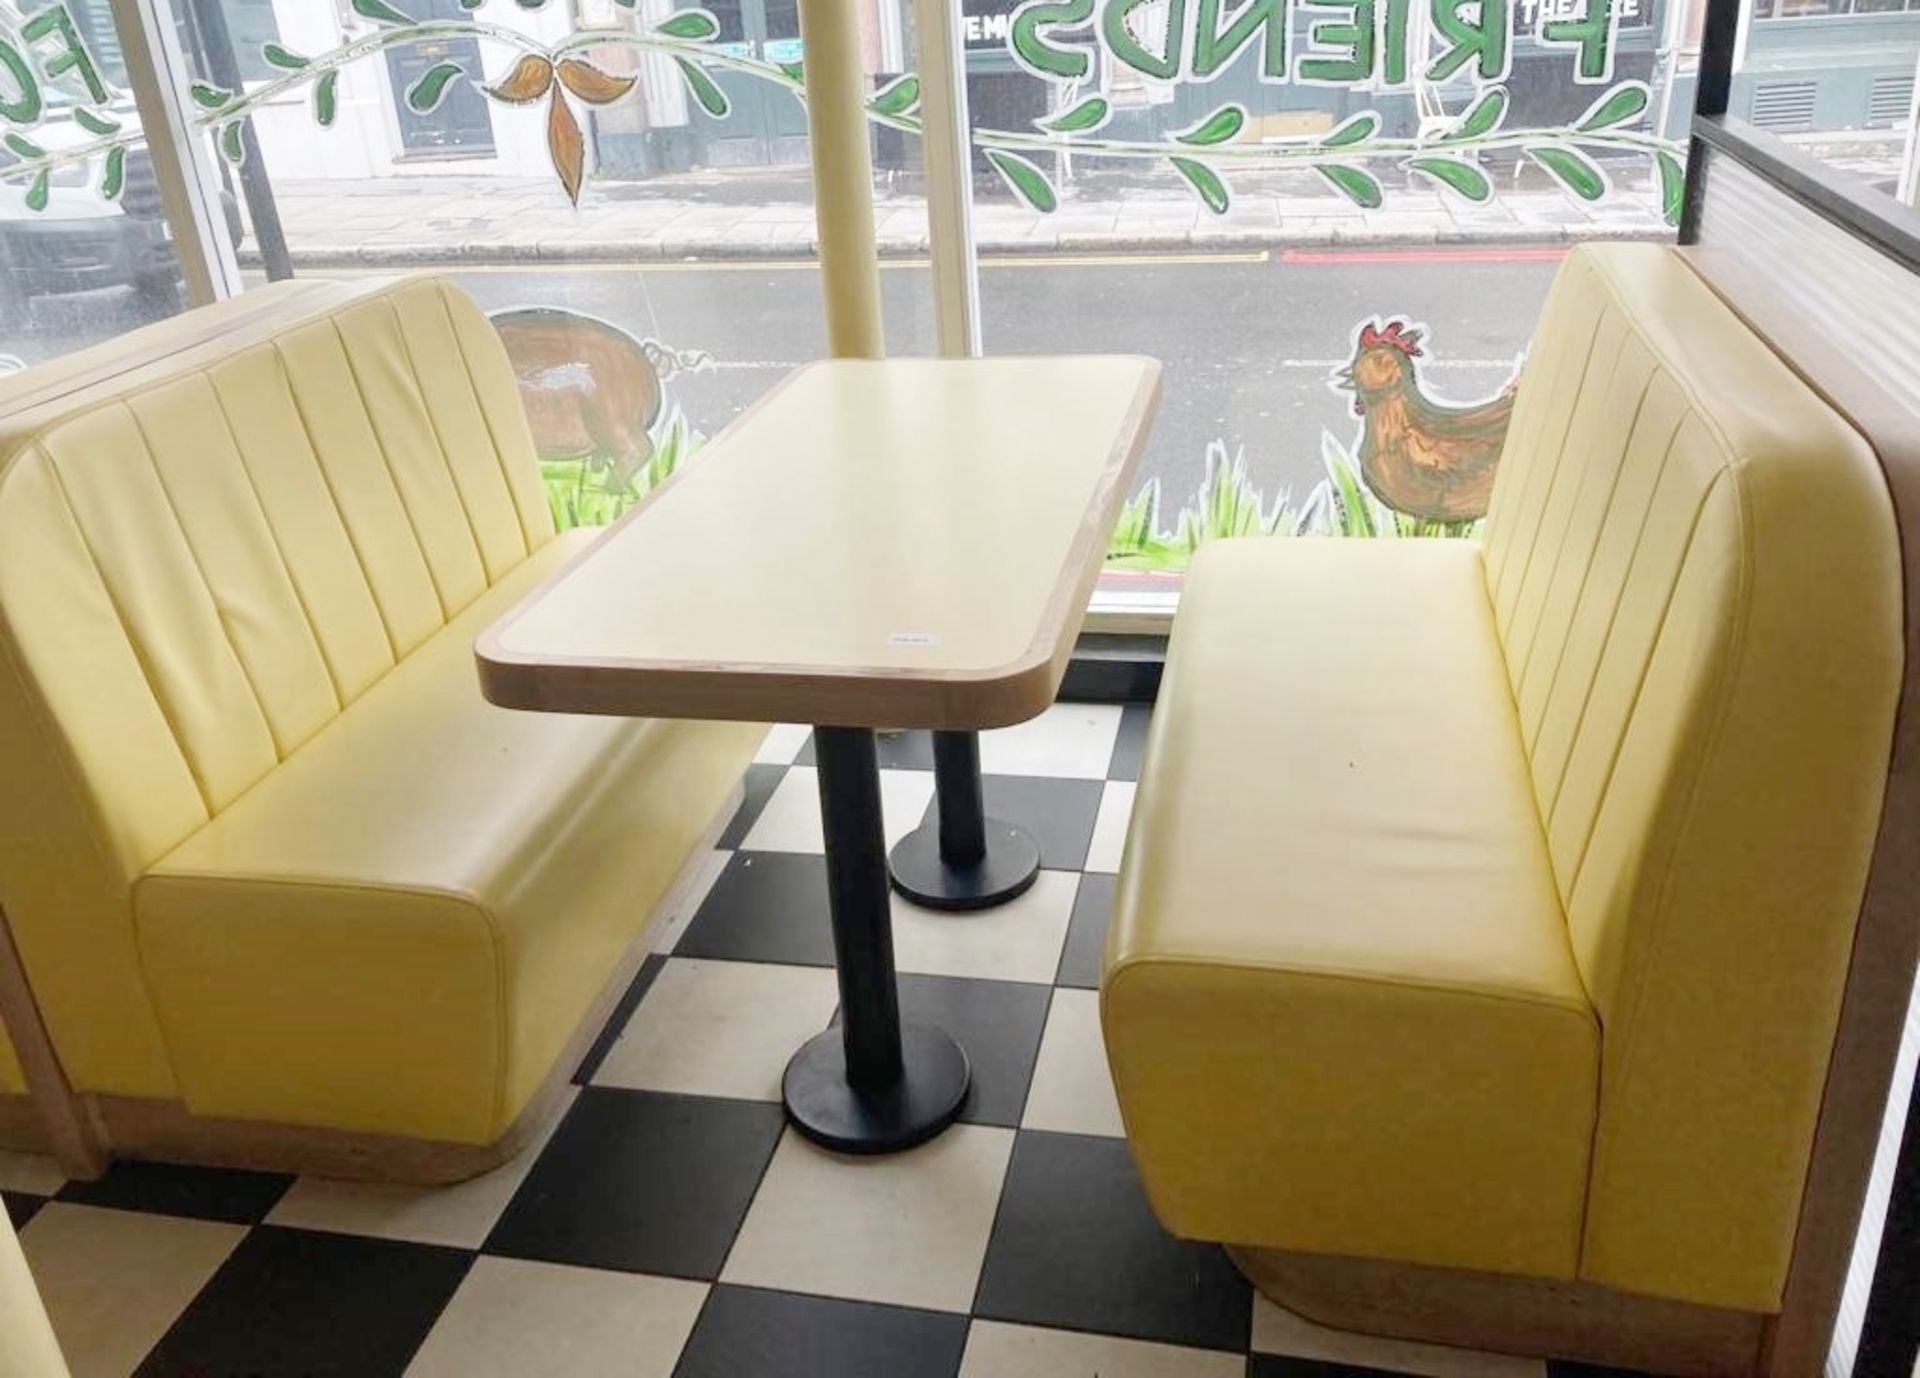 1 x Collection of Restaurant Seating Benches and Tables - Features a Light Wood and Faux Leather - Image 10 of 13